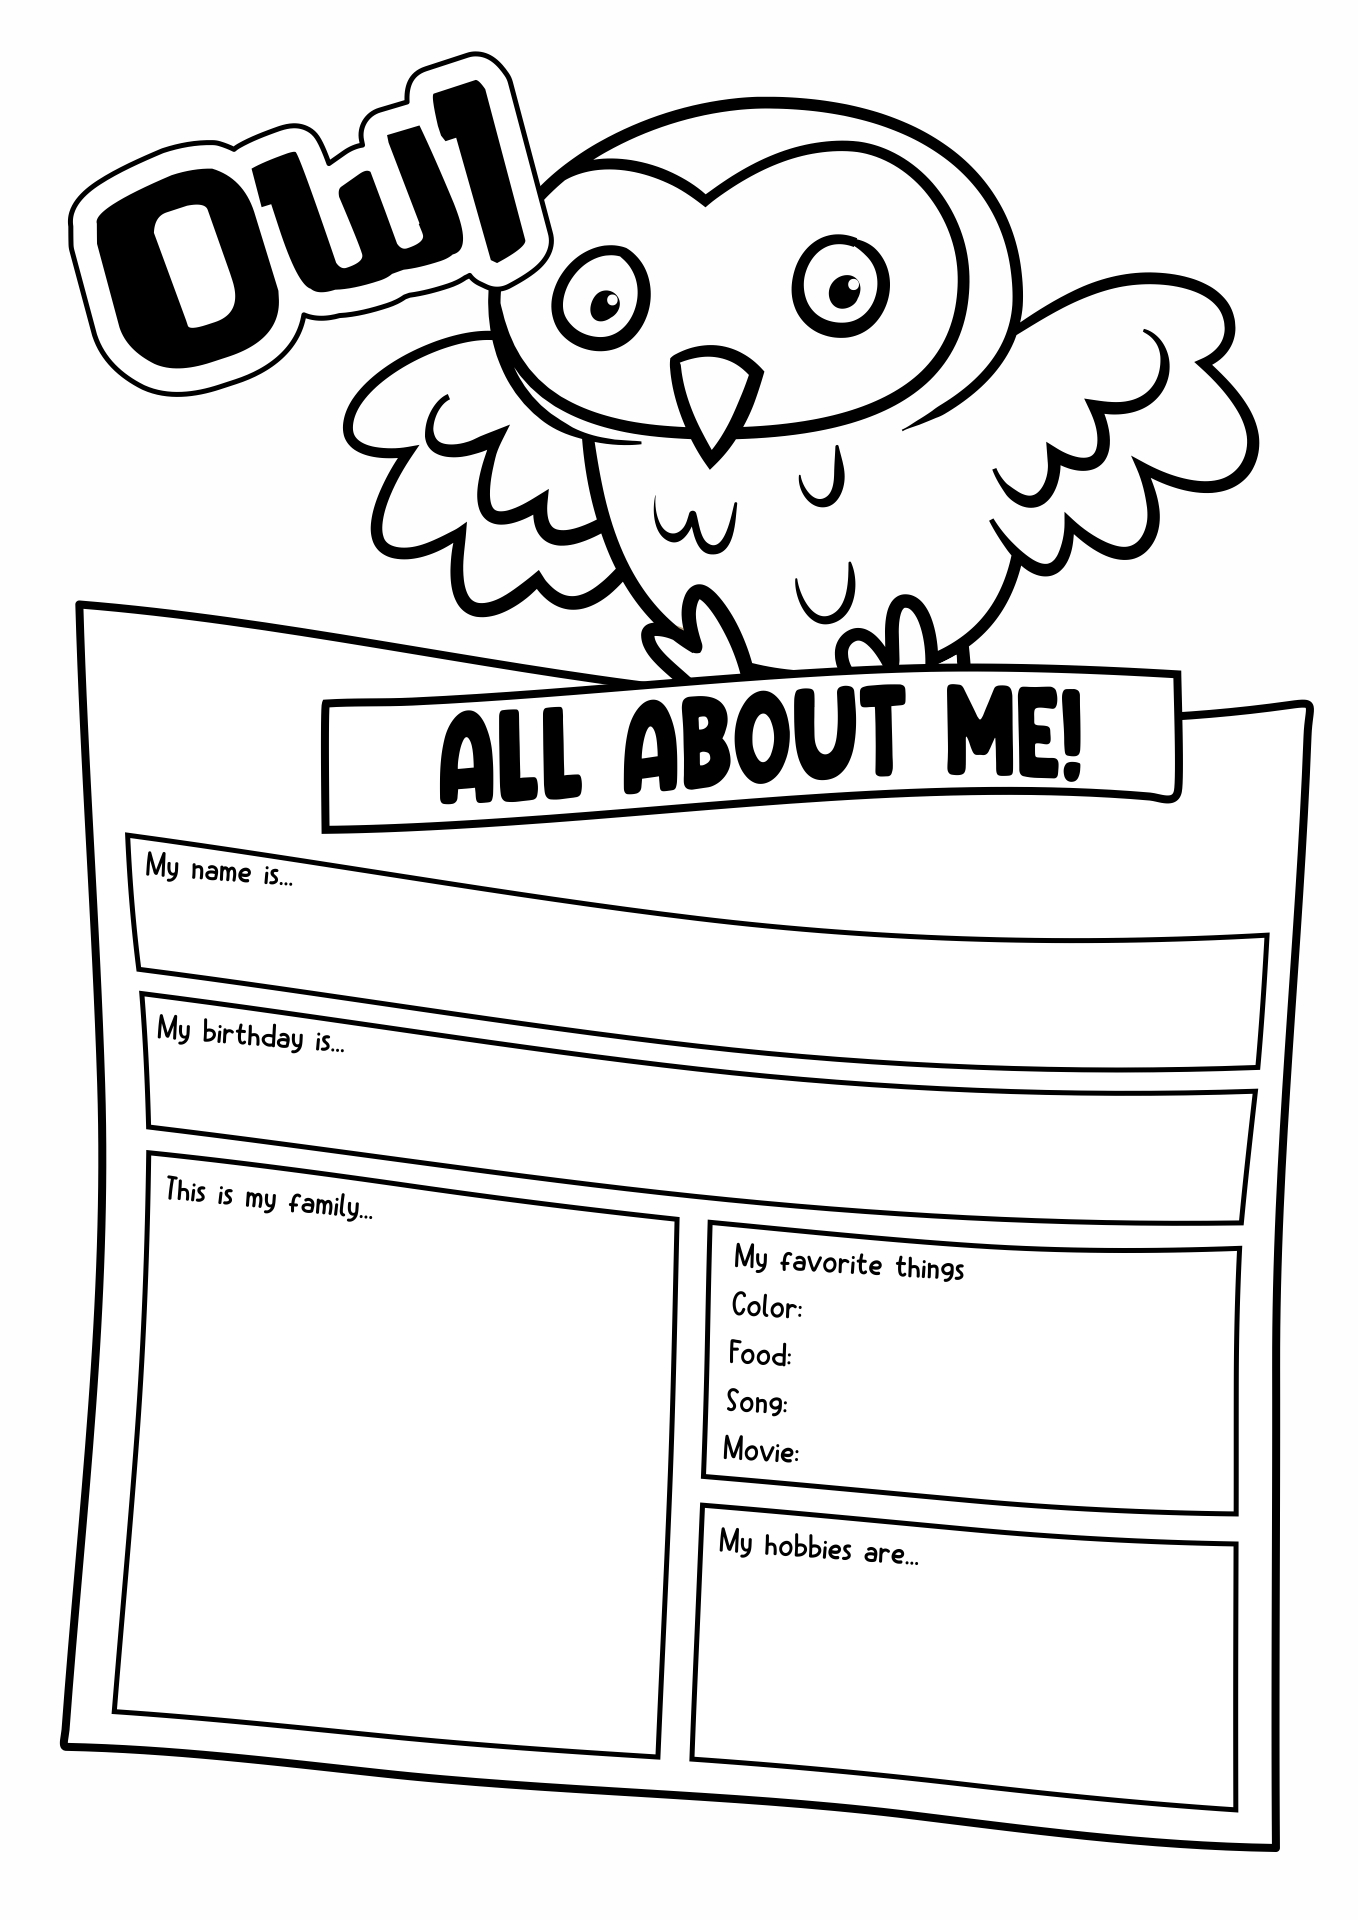 All About Me Printable Owl Image